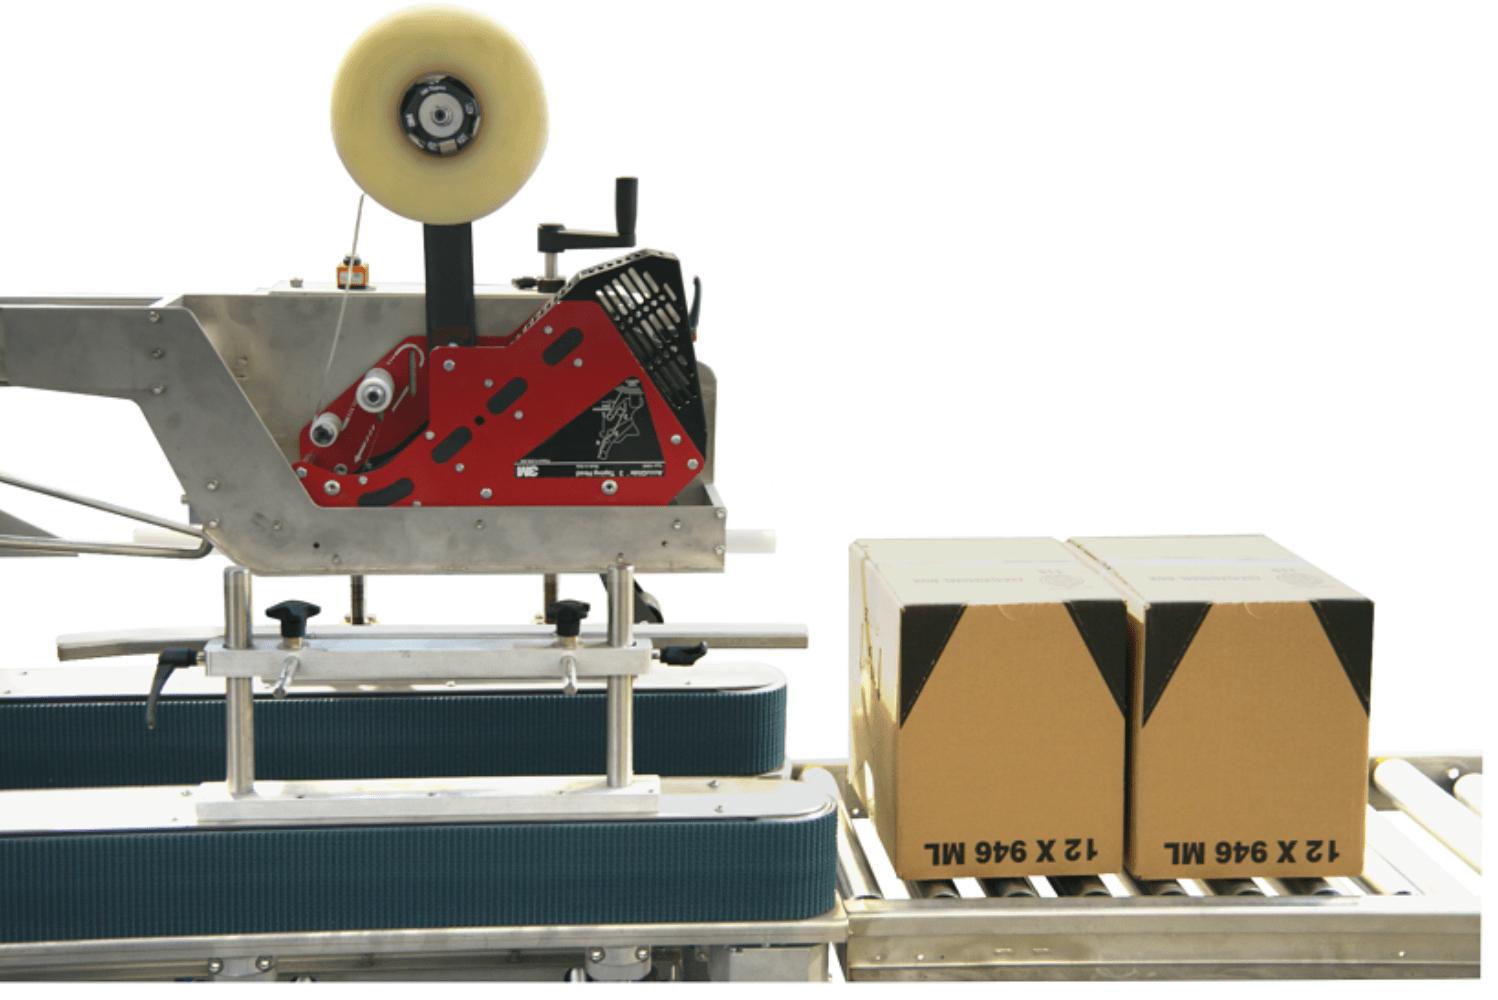 Automatic pick & place case packer for bottles